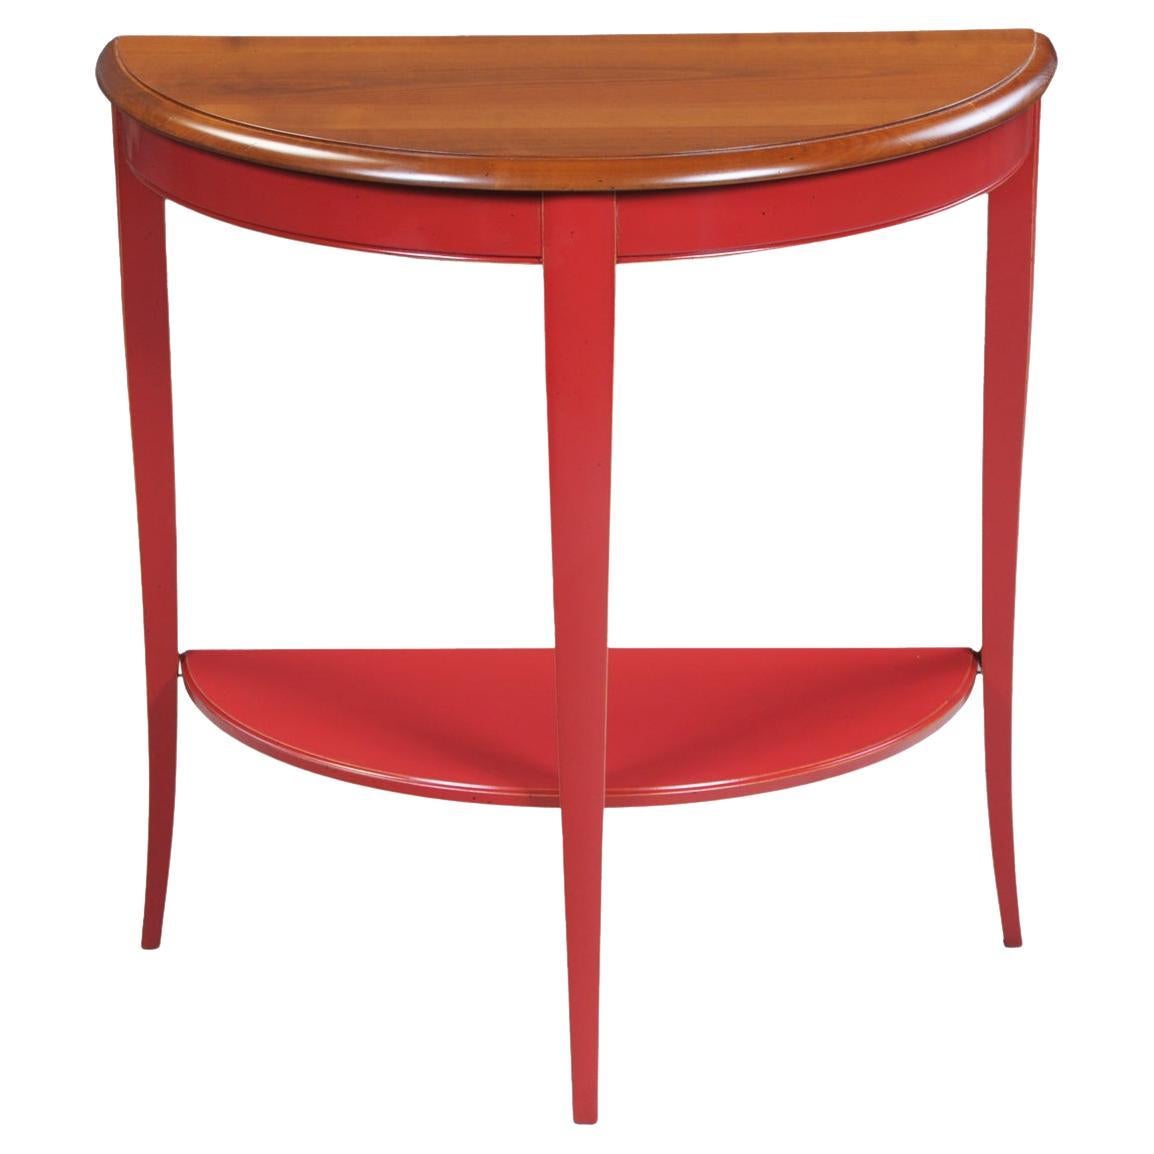 French provincial demi-lune console table in solid cherry,  poppy red lacquered For Sale